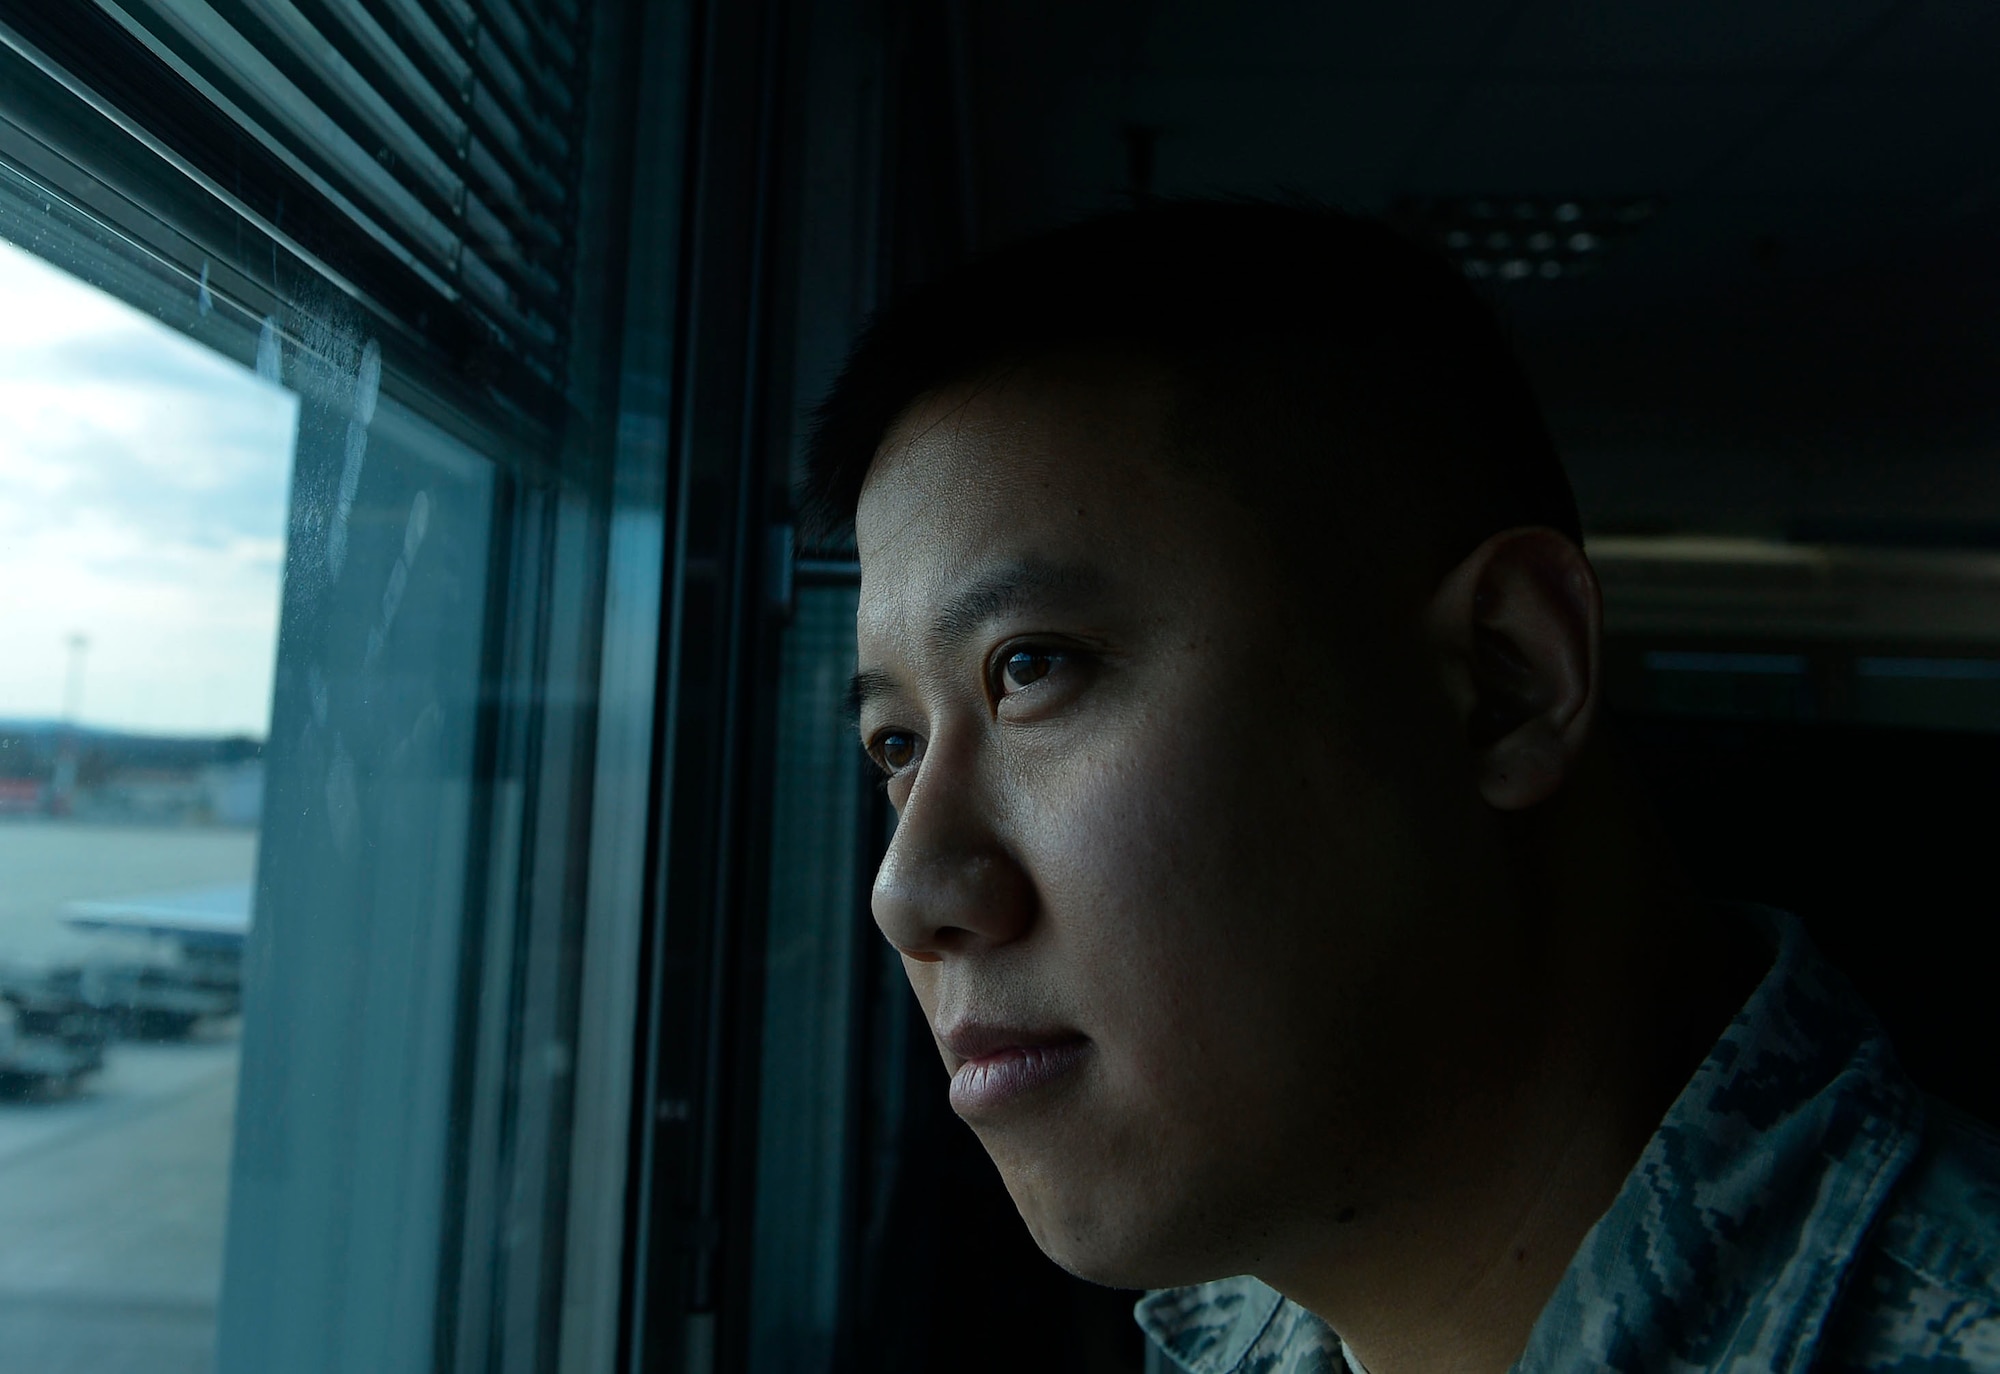 Staff Sgt. Srun Sookmeewiriya, 313th Expeditionary Operations Support Squadron NCO in charge of reports, stares out the window of his work center on Ramstein Air Base, Germany, Feb. 16, 2017. Sookmeewiriya attempted suicide twice after the death of both his parents. He now shares his story in an effort to help Airmen open up about struggles and bounce back from their challenges. (U.S. Air Force photo by Airman 1st Class Joshua Magbanua)